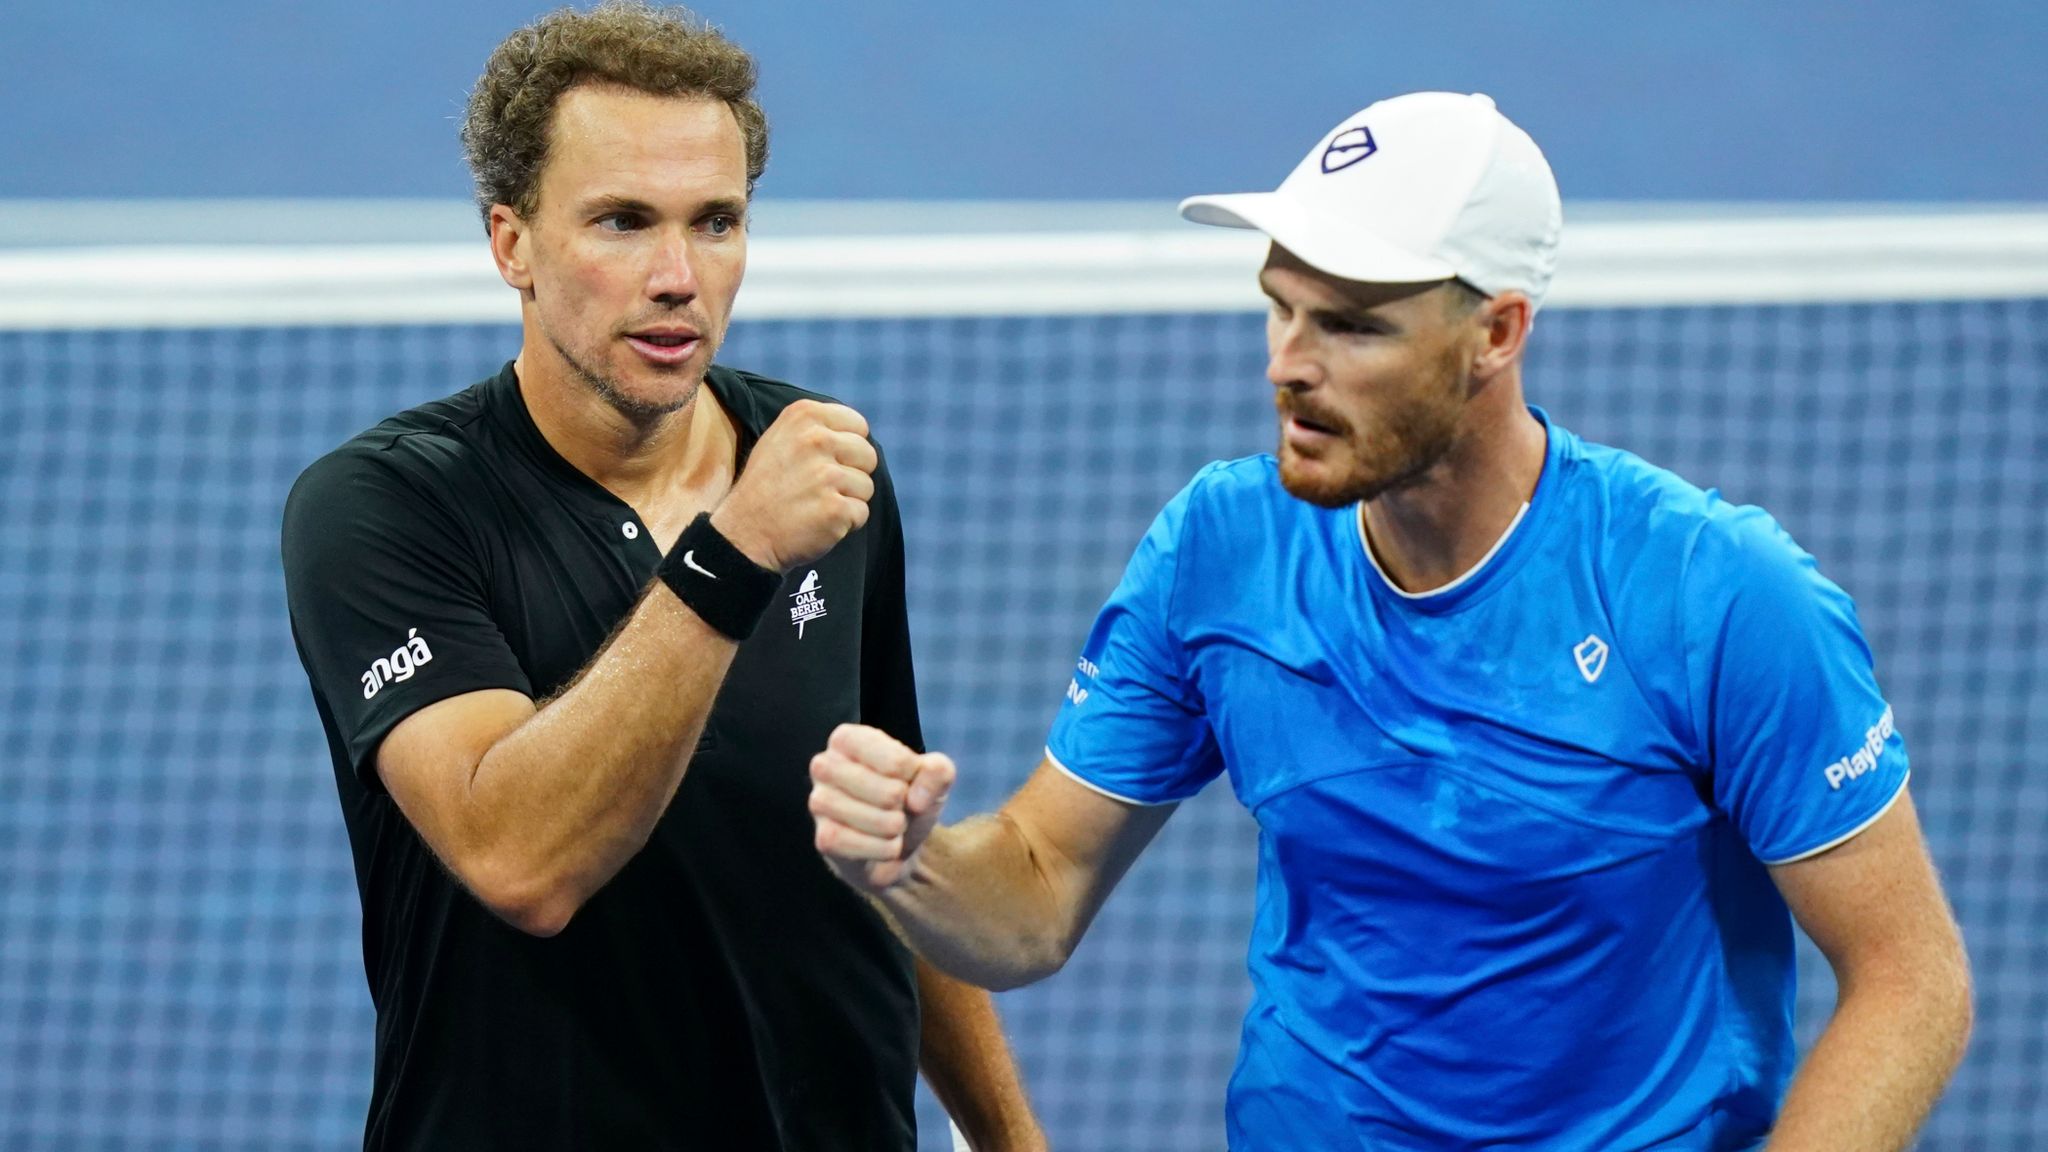 US Open Jamie Murray and Joe Salisbury to face off in mens doubles final on Friday Tennis News Sky Sports